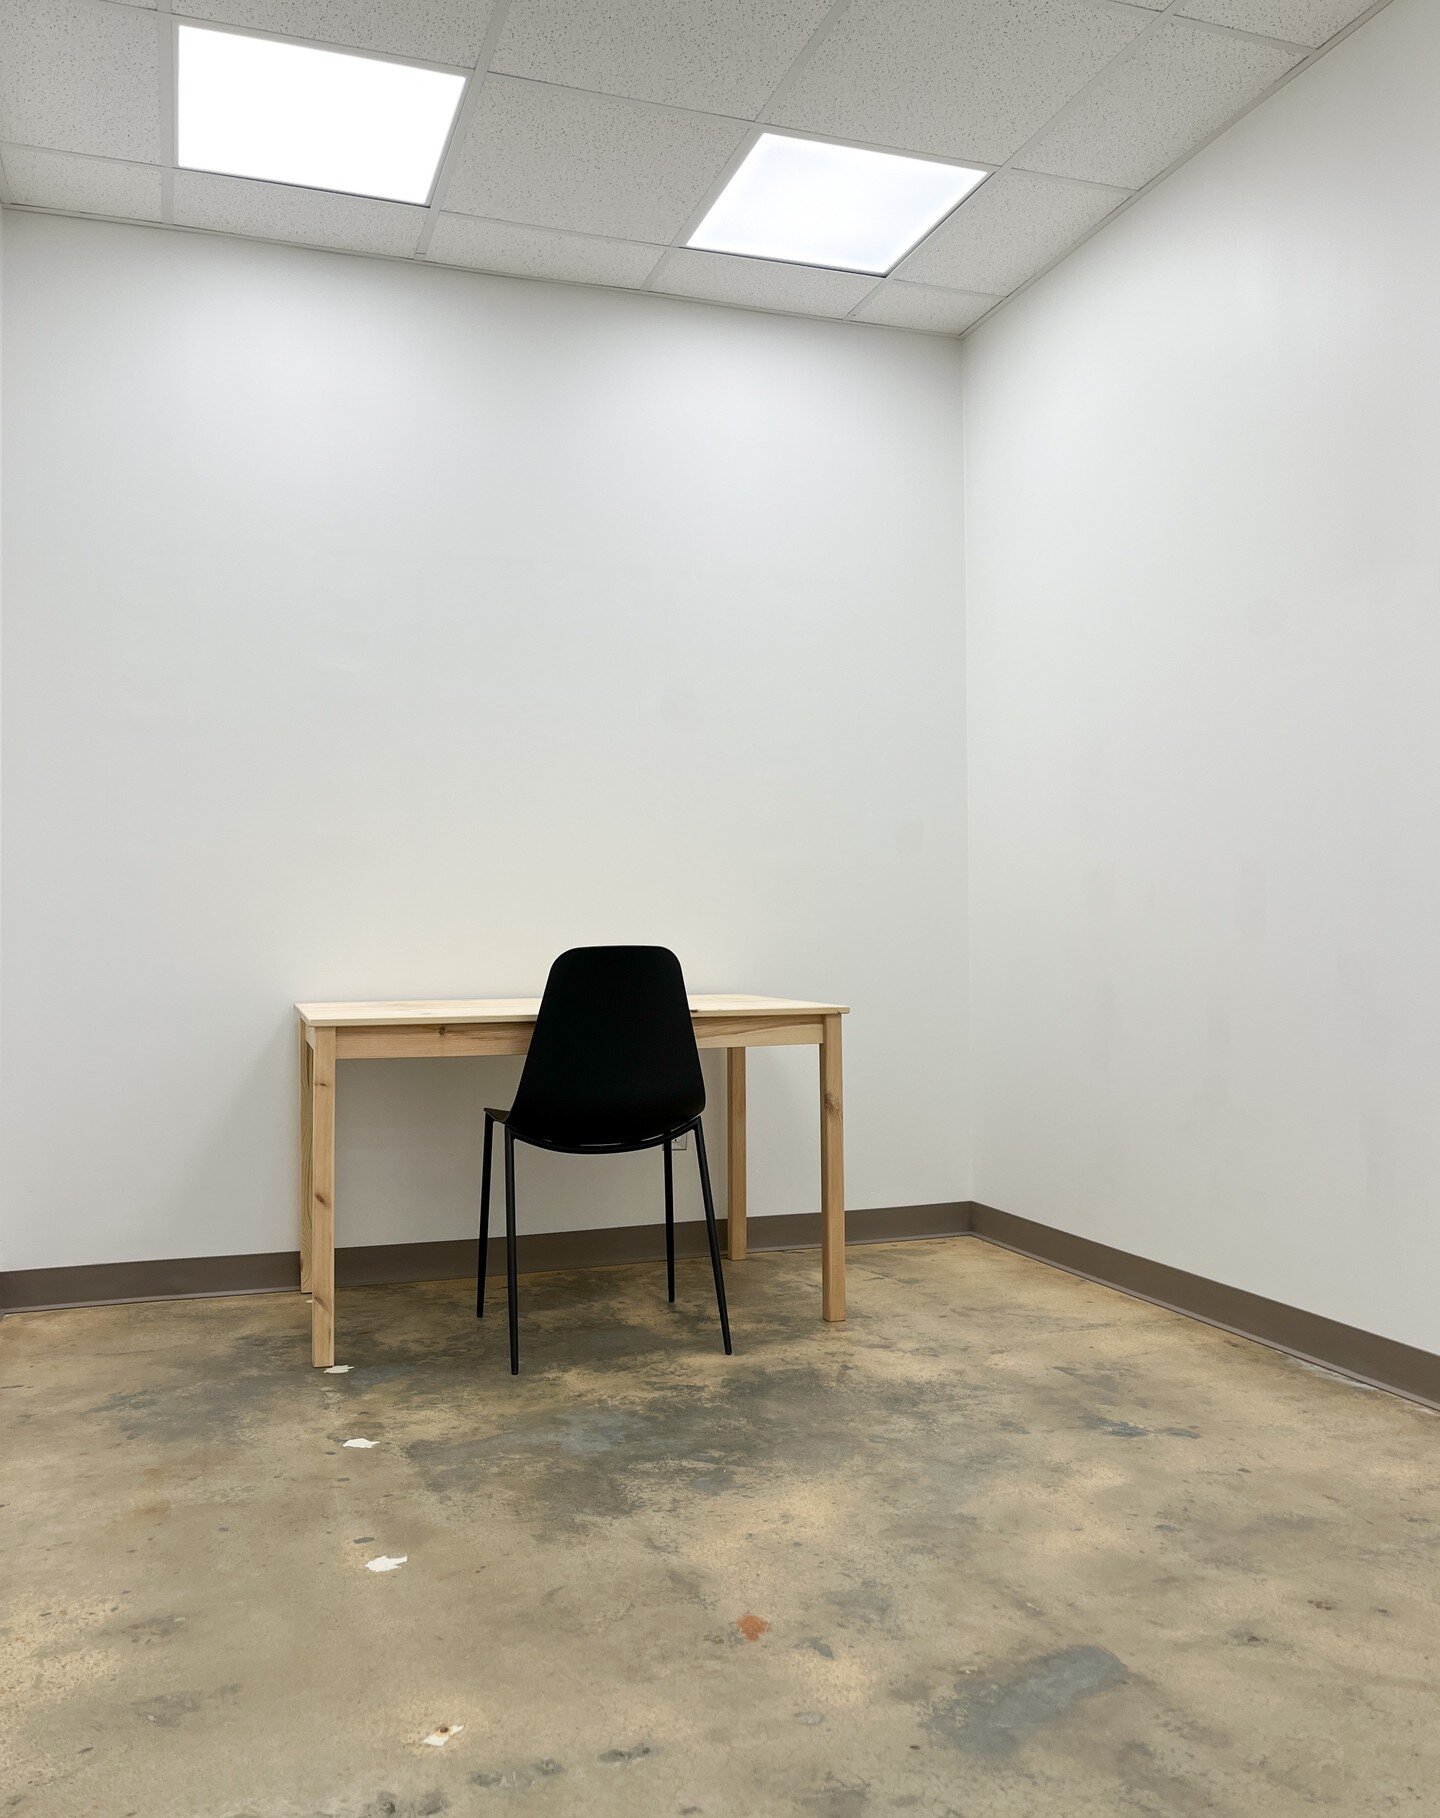 We've got a blank space, baby...

A private office is now available at Orchard House, and we think it has your name on it. DM us for info on this 100 square foot ticket to peace, productivity and your place among Birmingham's most wonderful women.

N